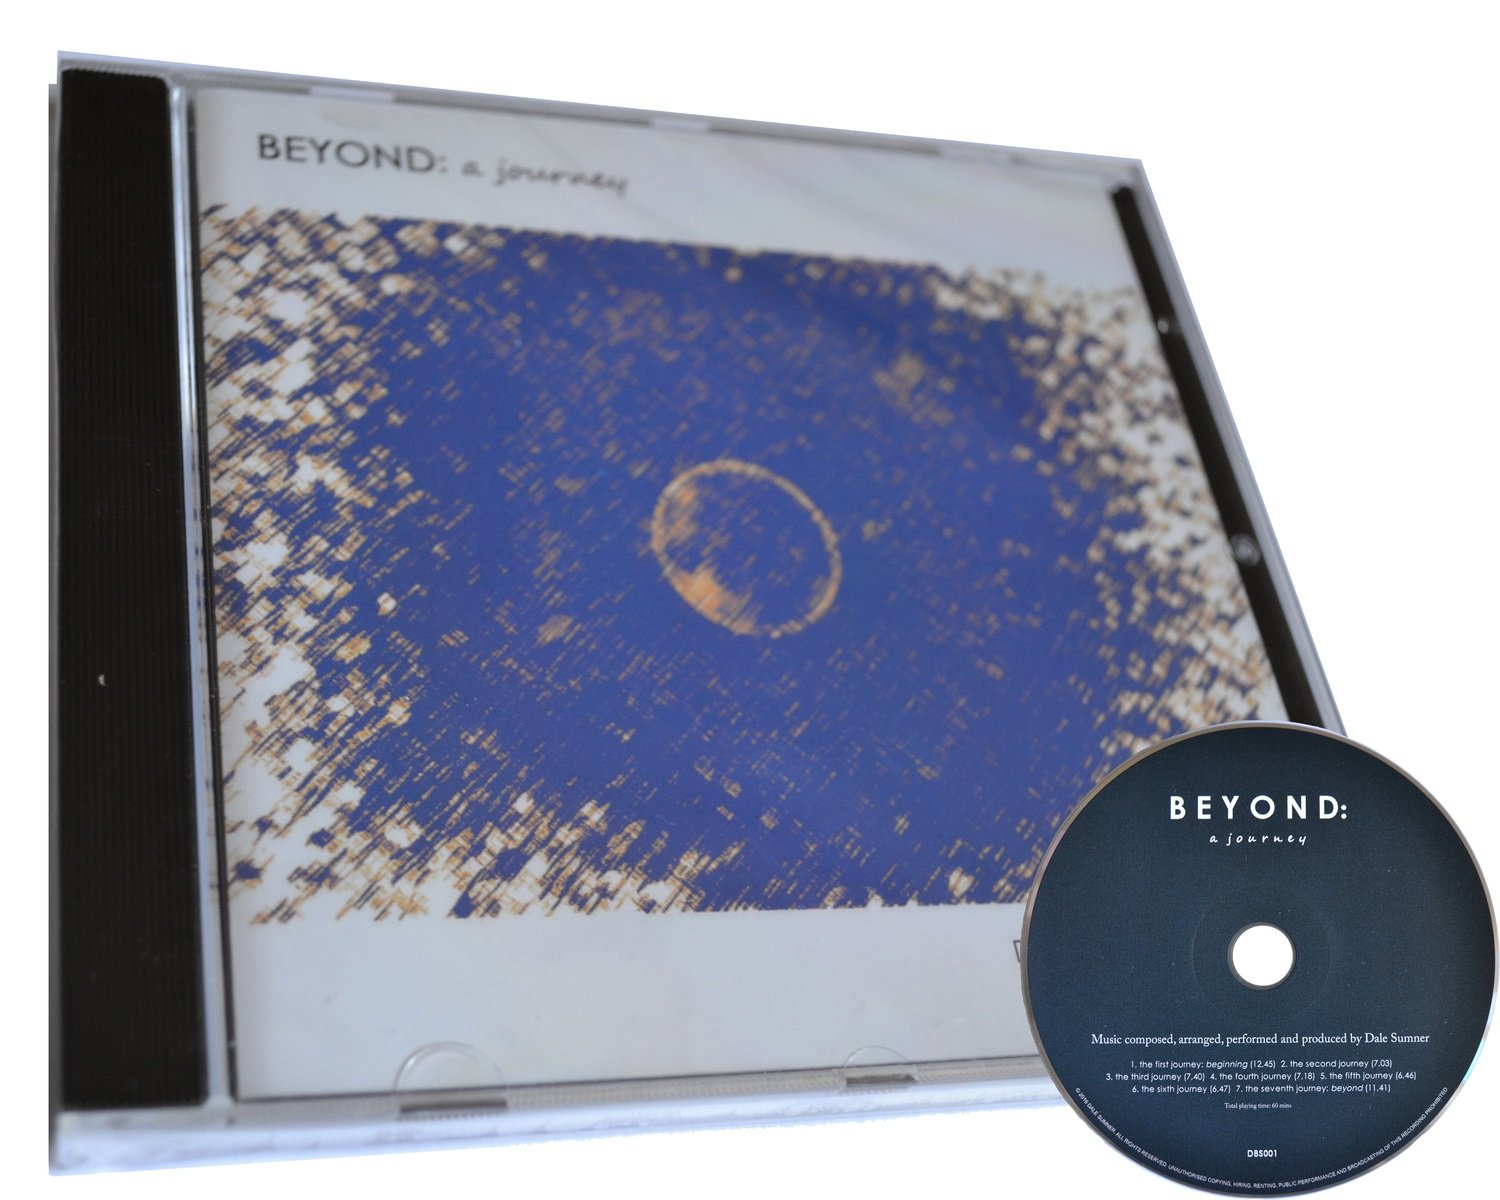 Beyond: a journey (relaxation music CD)